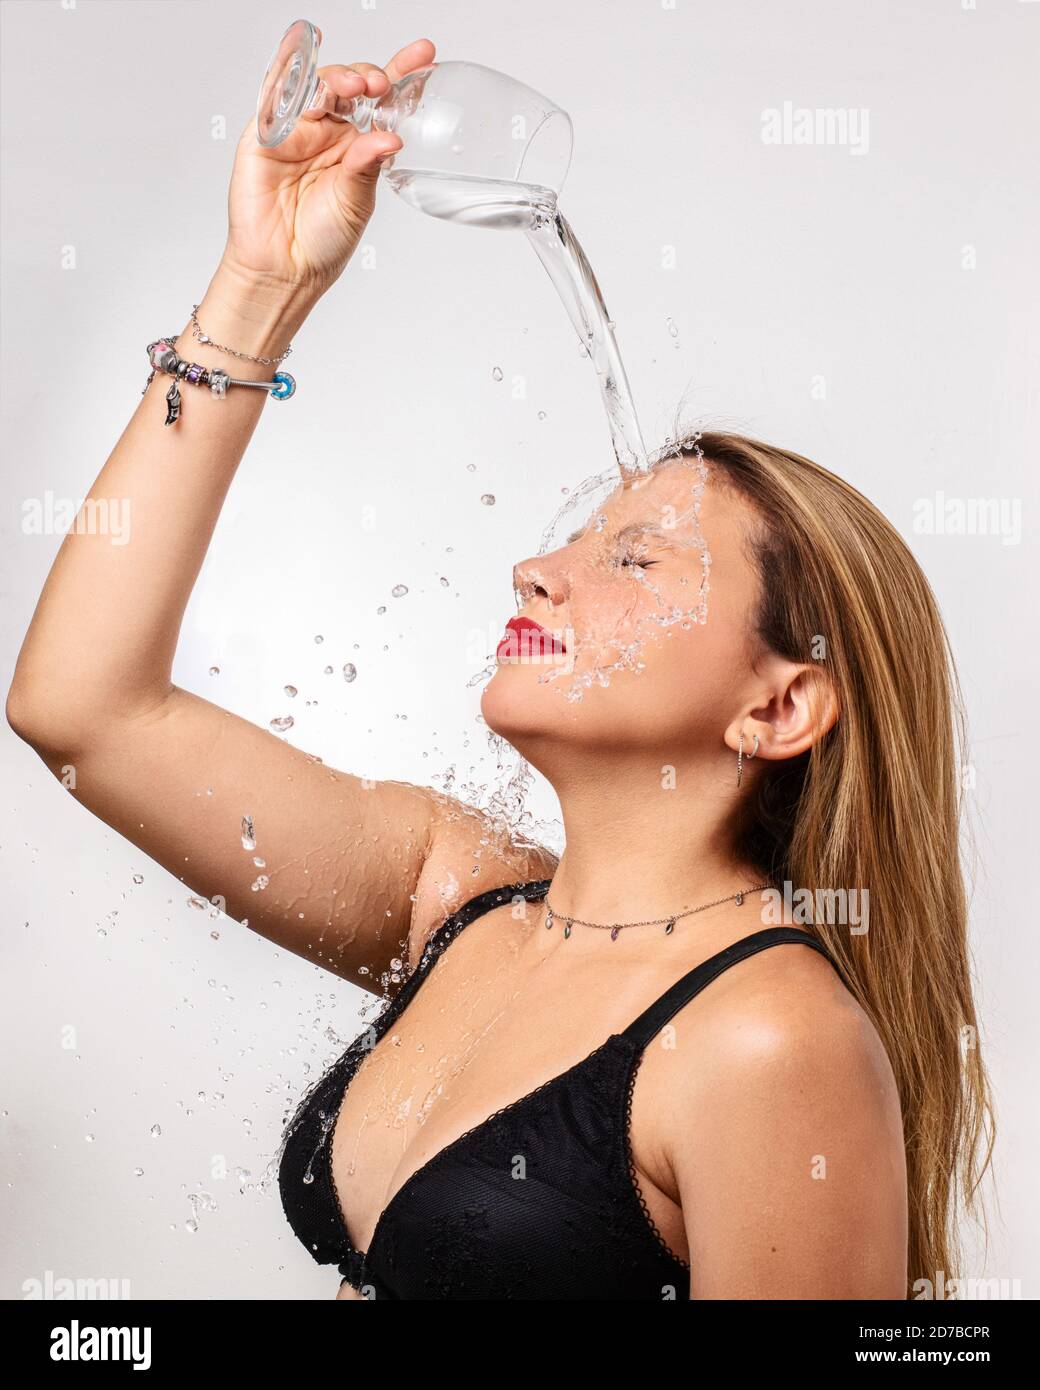 Young caucasian woman splashing a glass goblet of water on herself beauty studio portrait isolated on white background Stock Photo